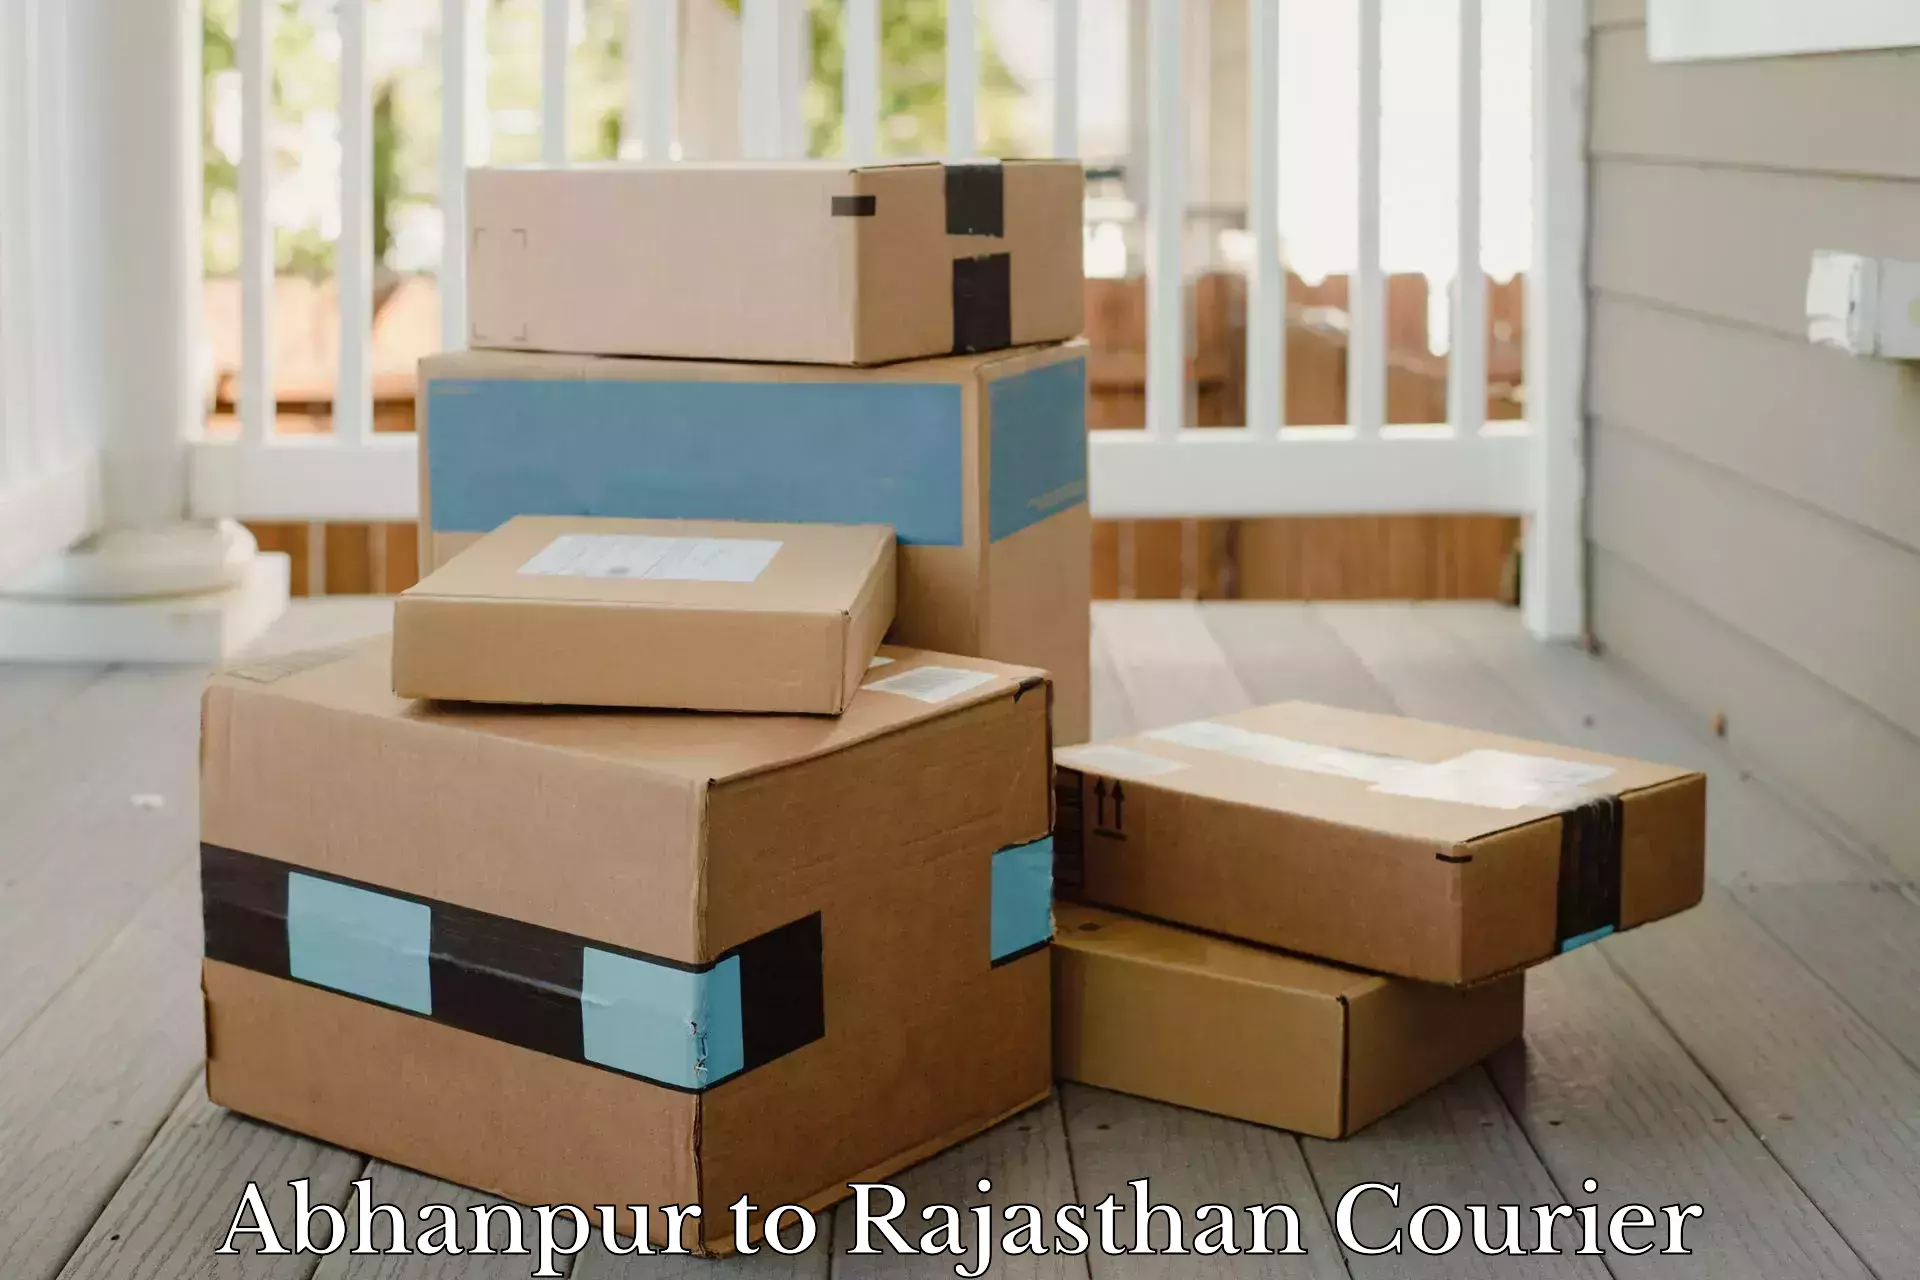 Courier service comparison in Abhanpur to Balaran